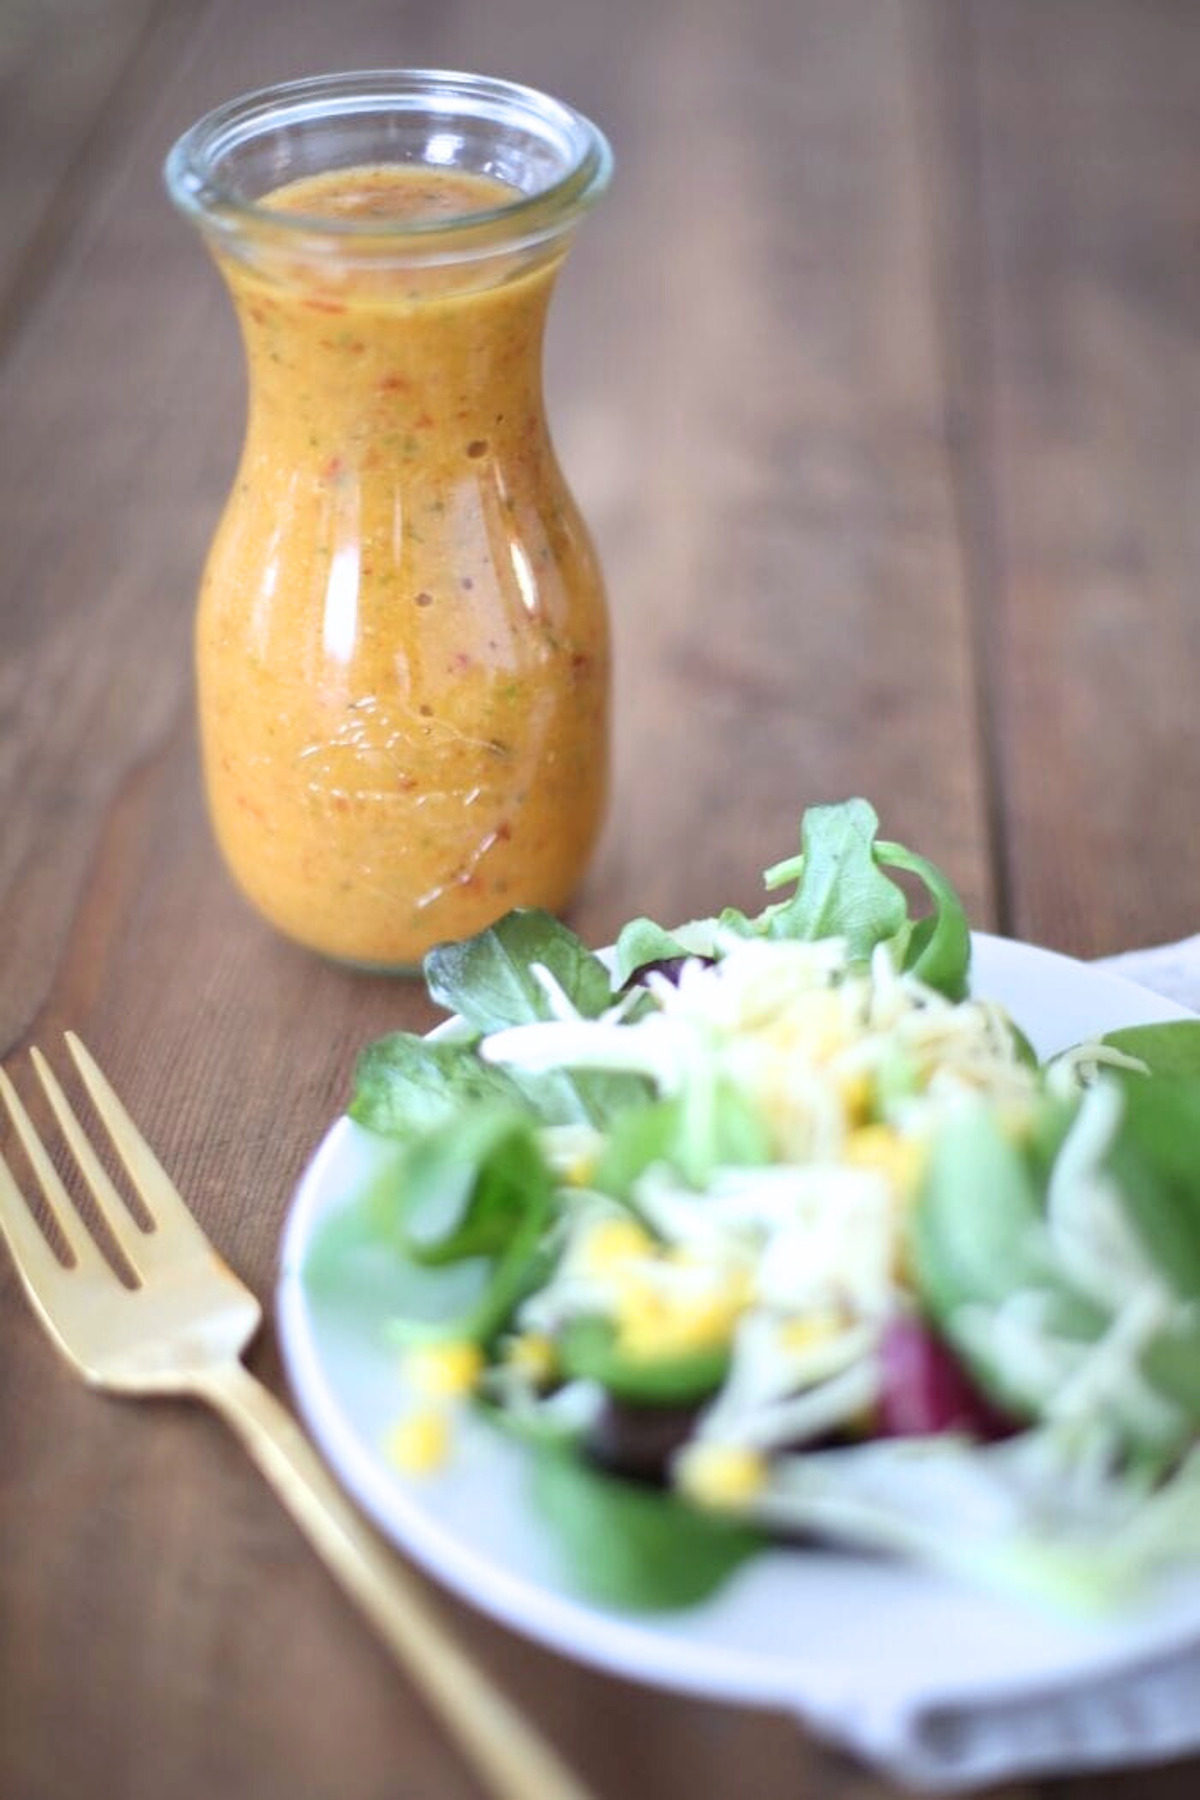 A plate with a salad and a jar of apple dressing.